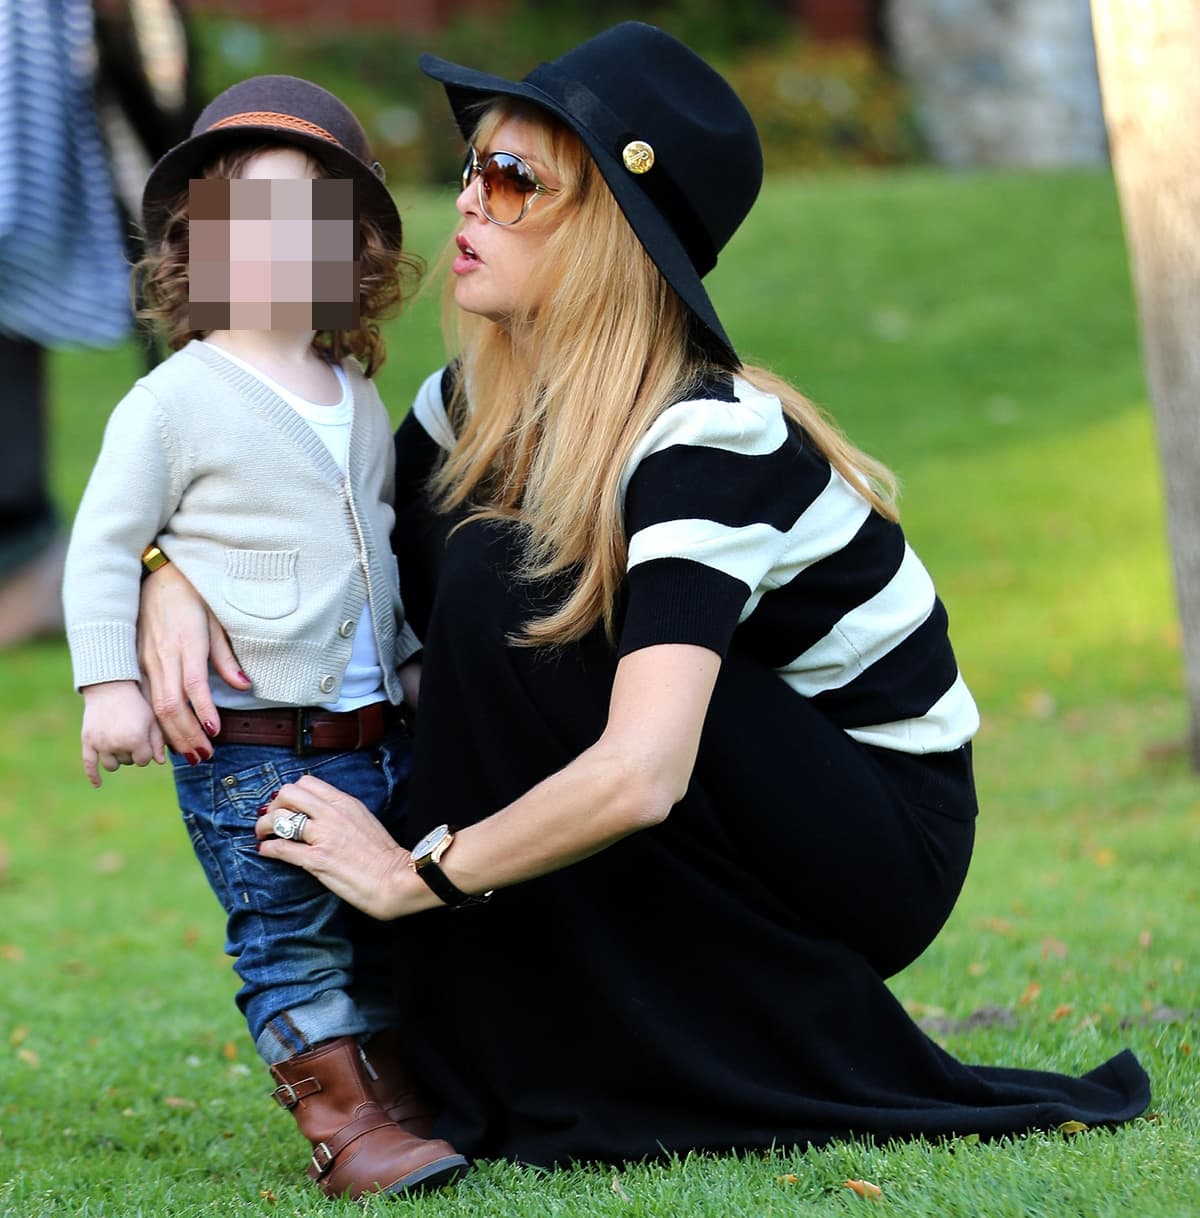 Rachel Zoe with her son Skyler Morrison Berman at Coldwater Canyon Park